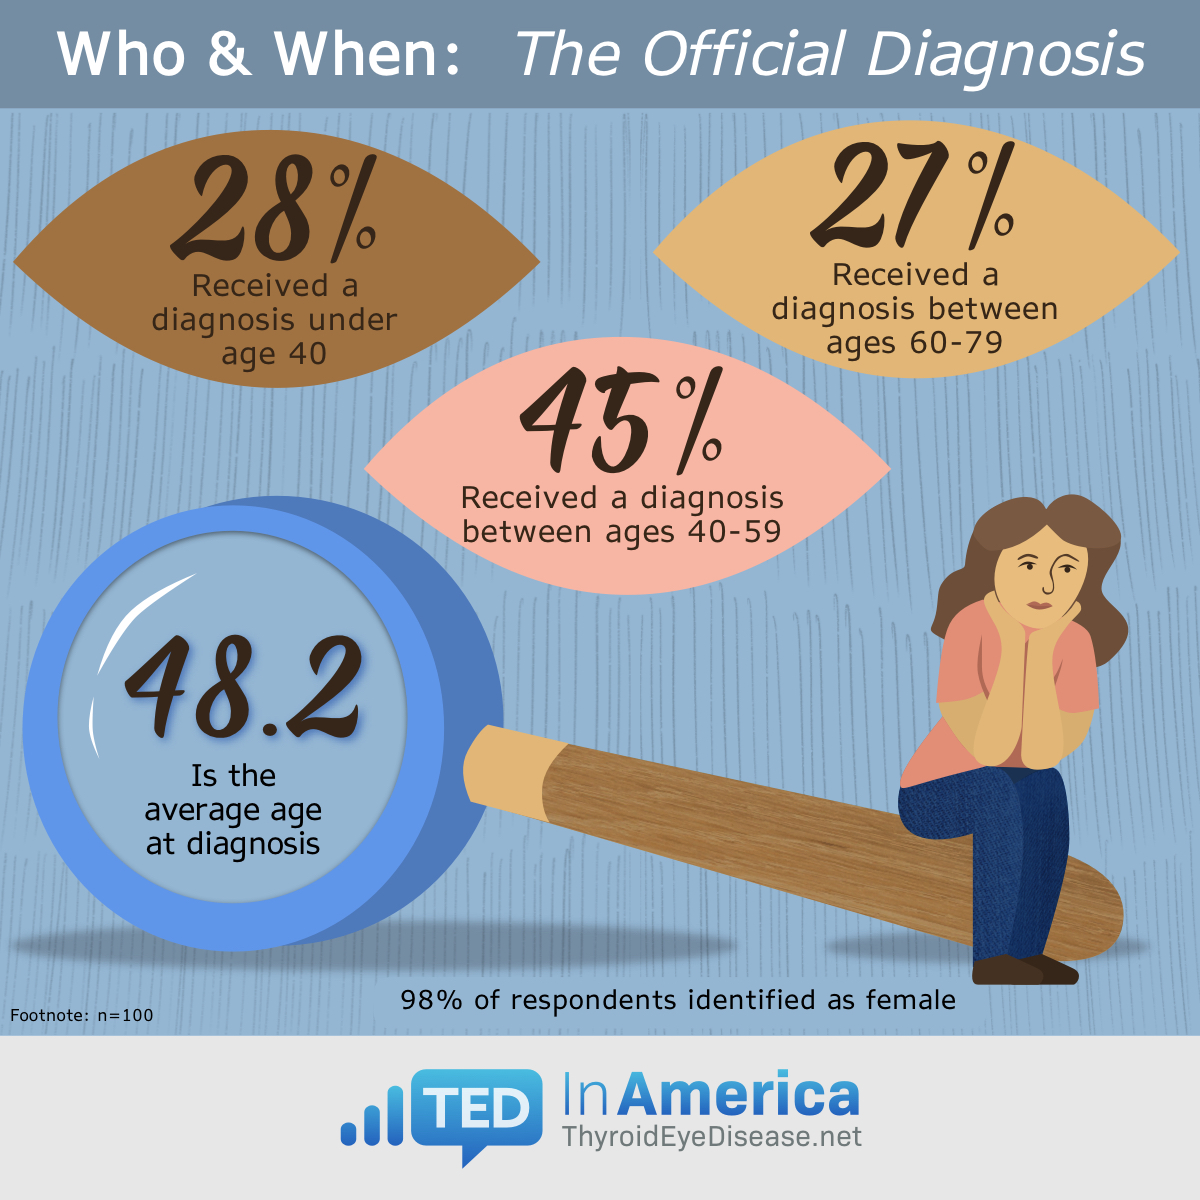 Who and When: The Official Diagnosis: 27% received a diagnosis between ages 60-79, 28% received a diagnosis under age 40, 45% received a diagnosis between ages 40-59, and 48.2 is the average age at diagnosis. 98% of respondents identified as female.